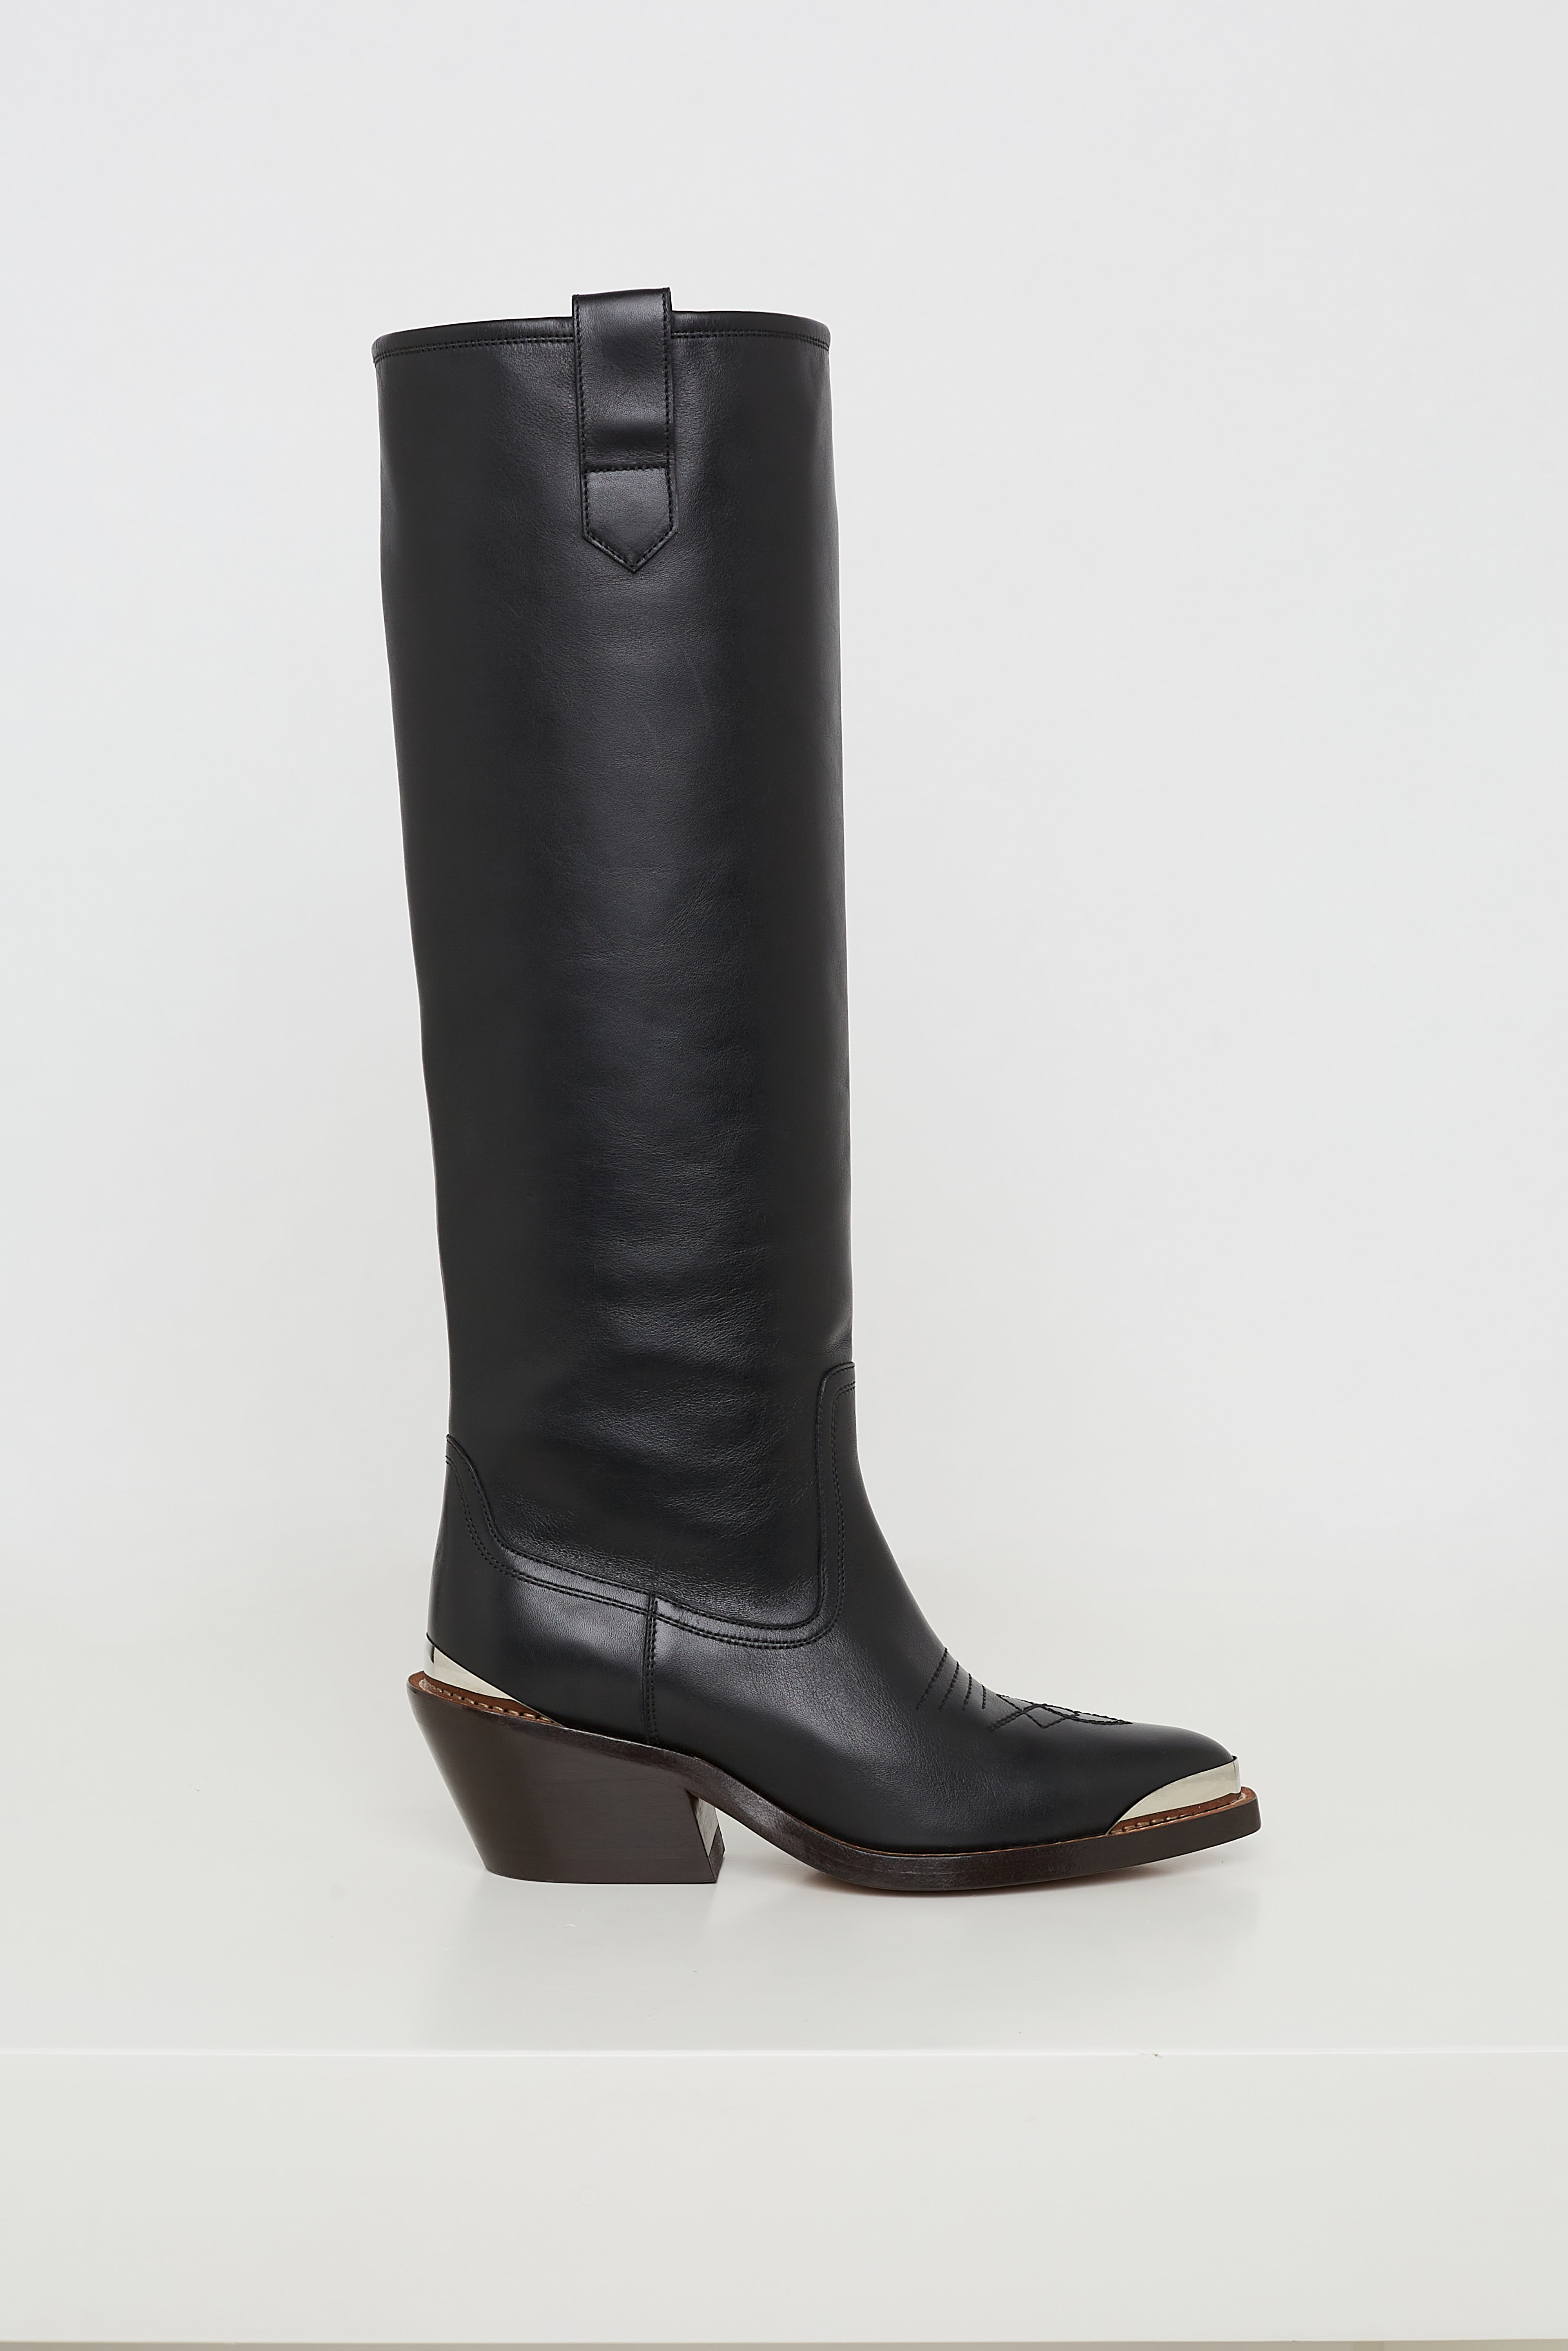 Dorothee-Schumacher-OUTLET-SALE-WESTERN-SUMMER-Tall-Boot-Stiefel-Stiefeletten-ARCHIVE-COLLECTION-2_6e2c2741-c8e9-4f2f-a20f-2a8962ea653e.jpg